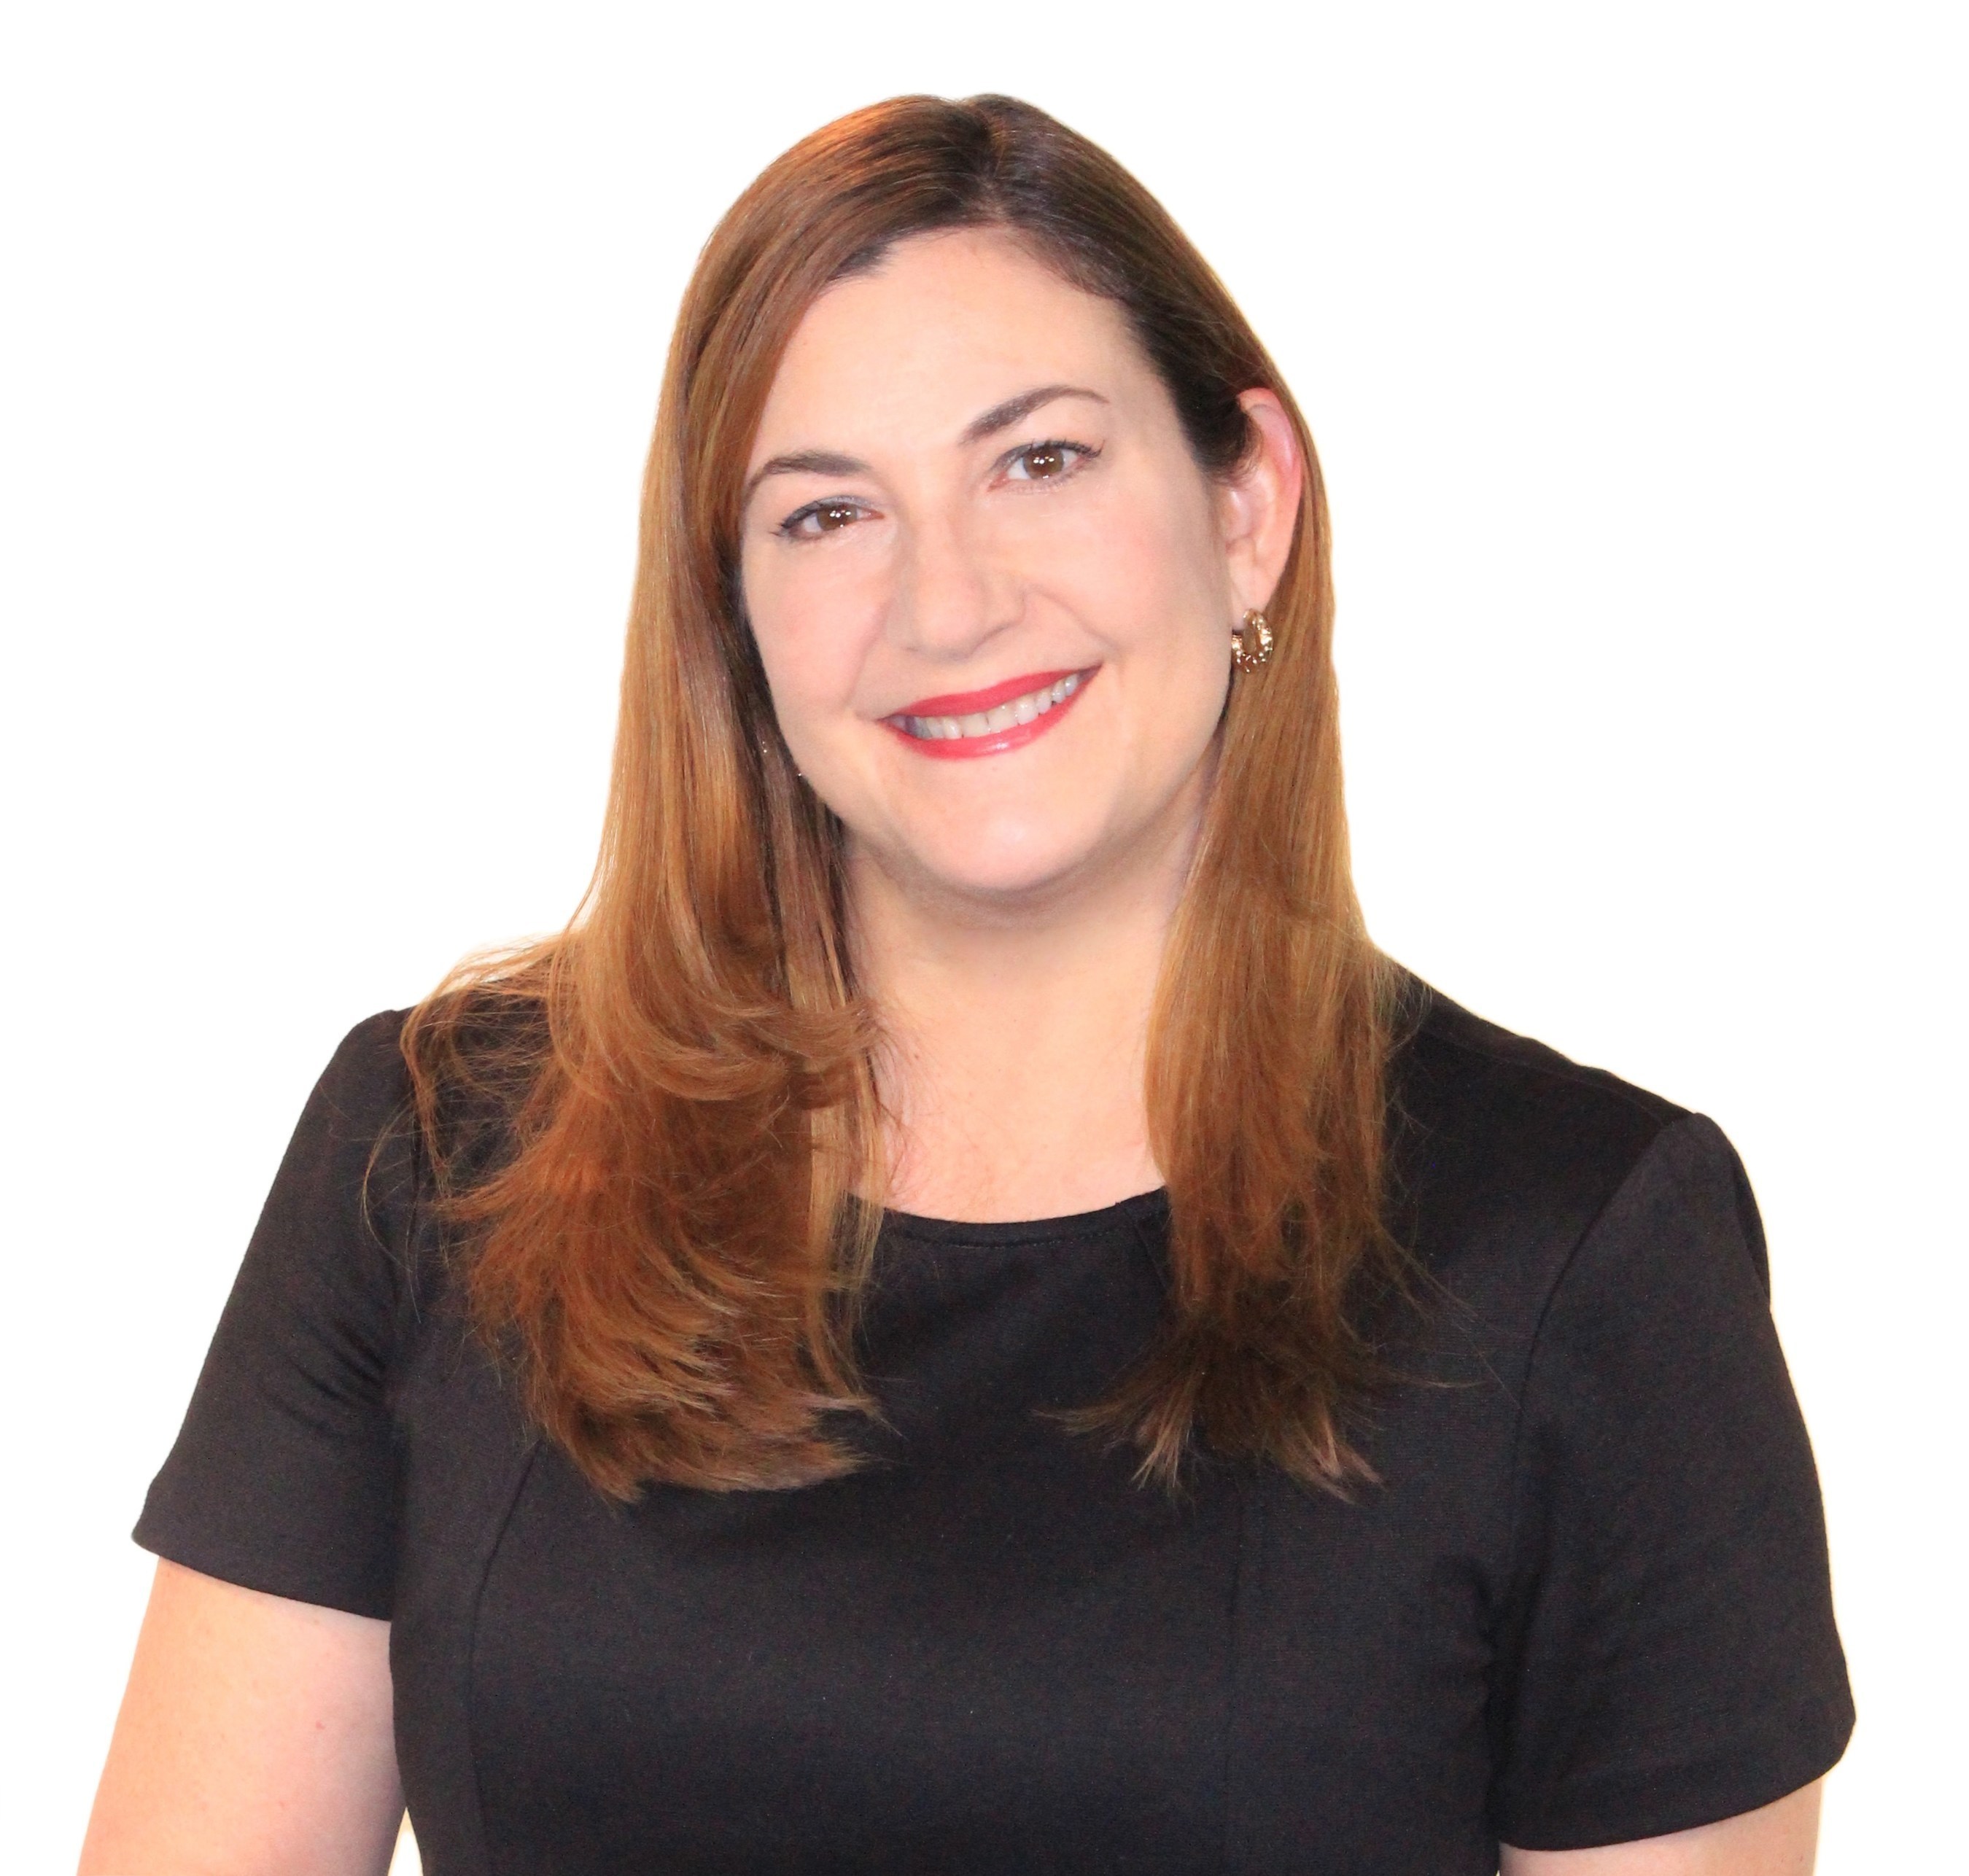 Lisette Hoyo, senior vice president of client services at Newlink America